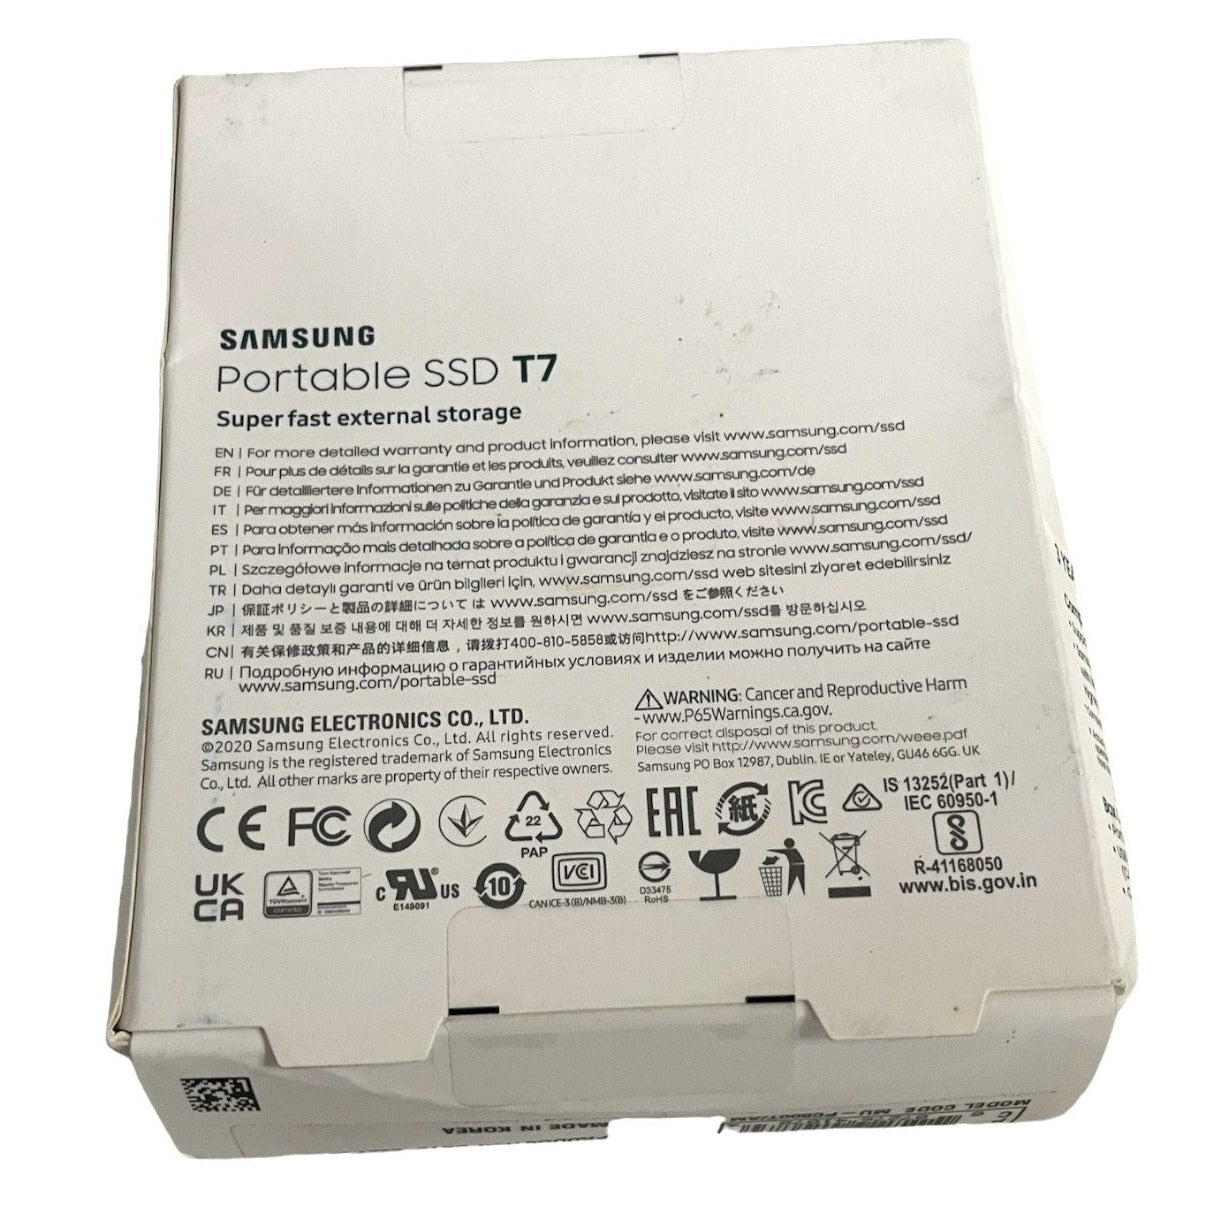 Samsung Portable SSD T7 500GB For Windows, Mac, Android, Model MU-PC500T